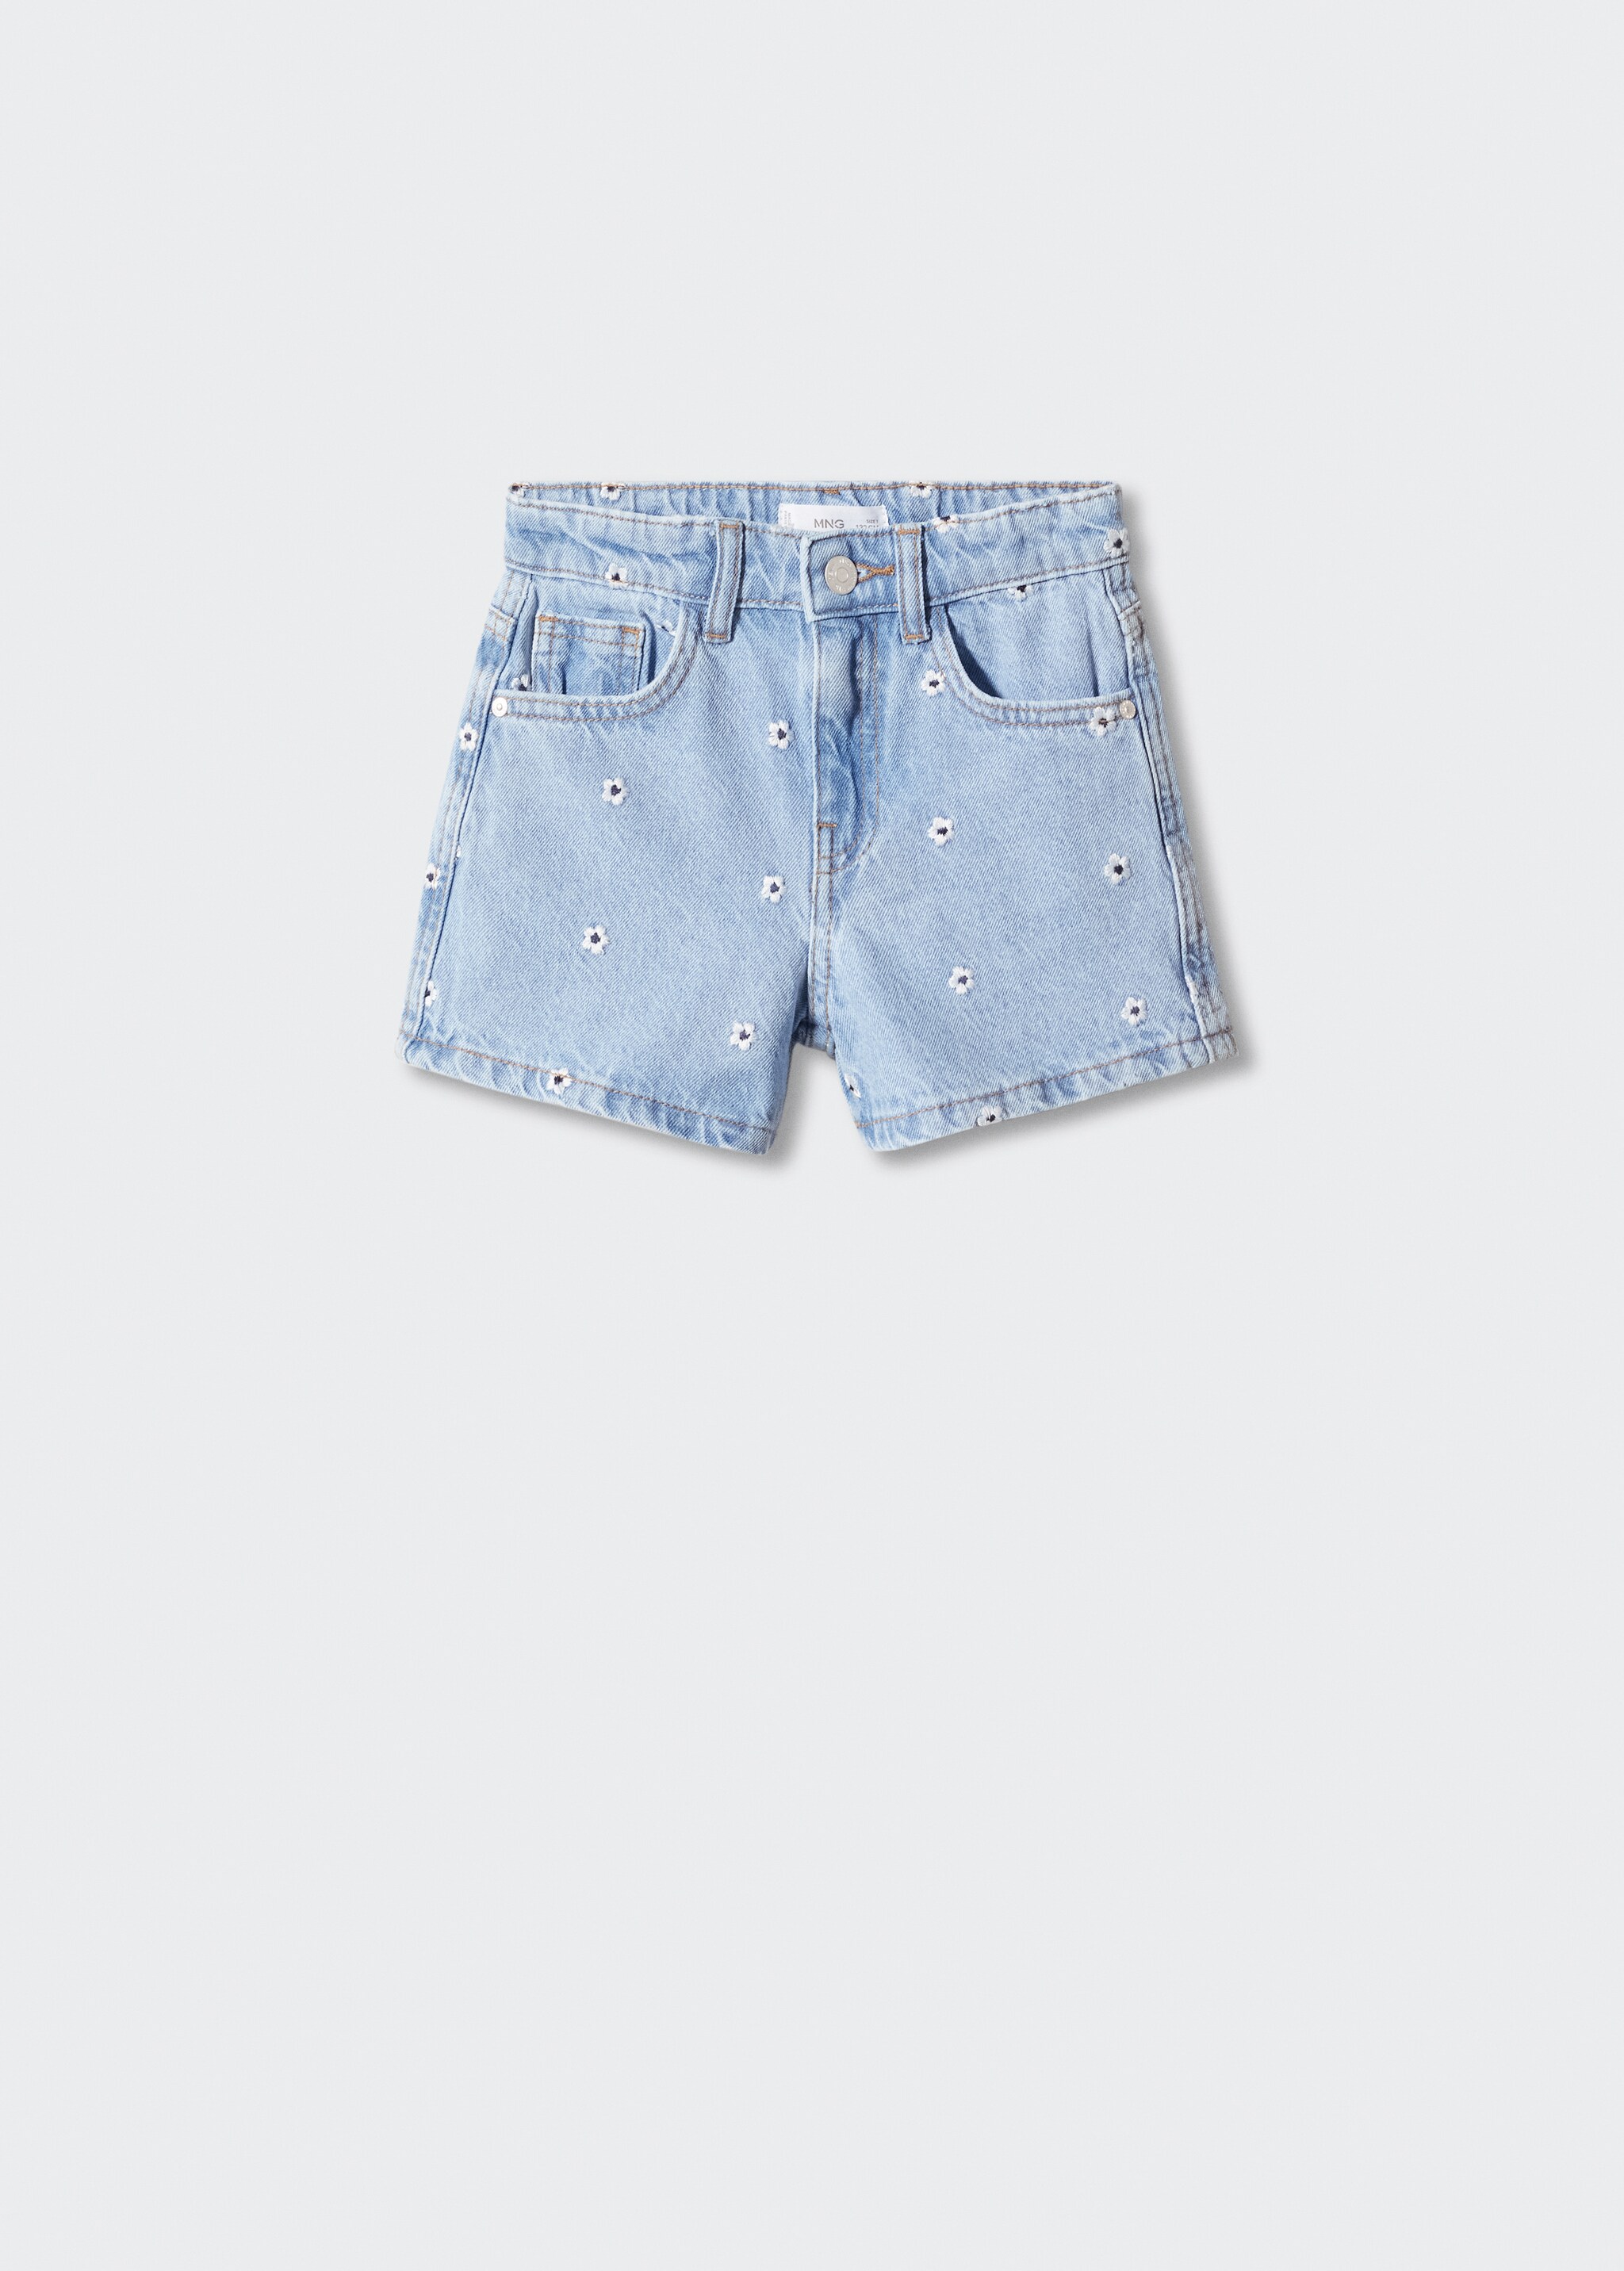 Floral denim shorts - Article without model